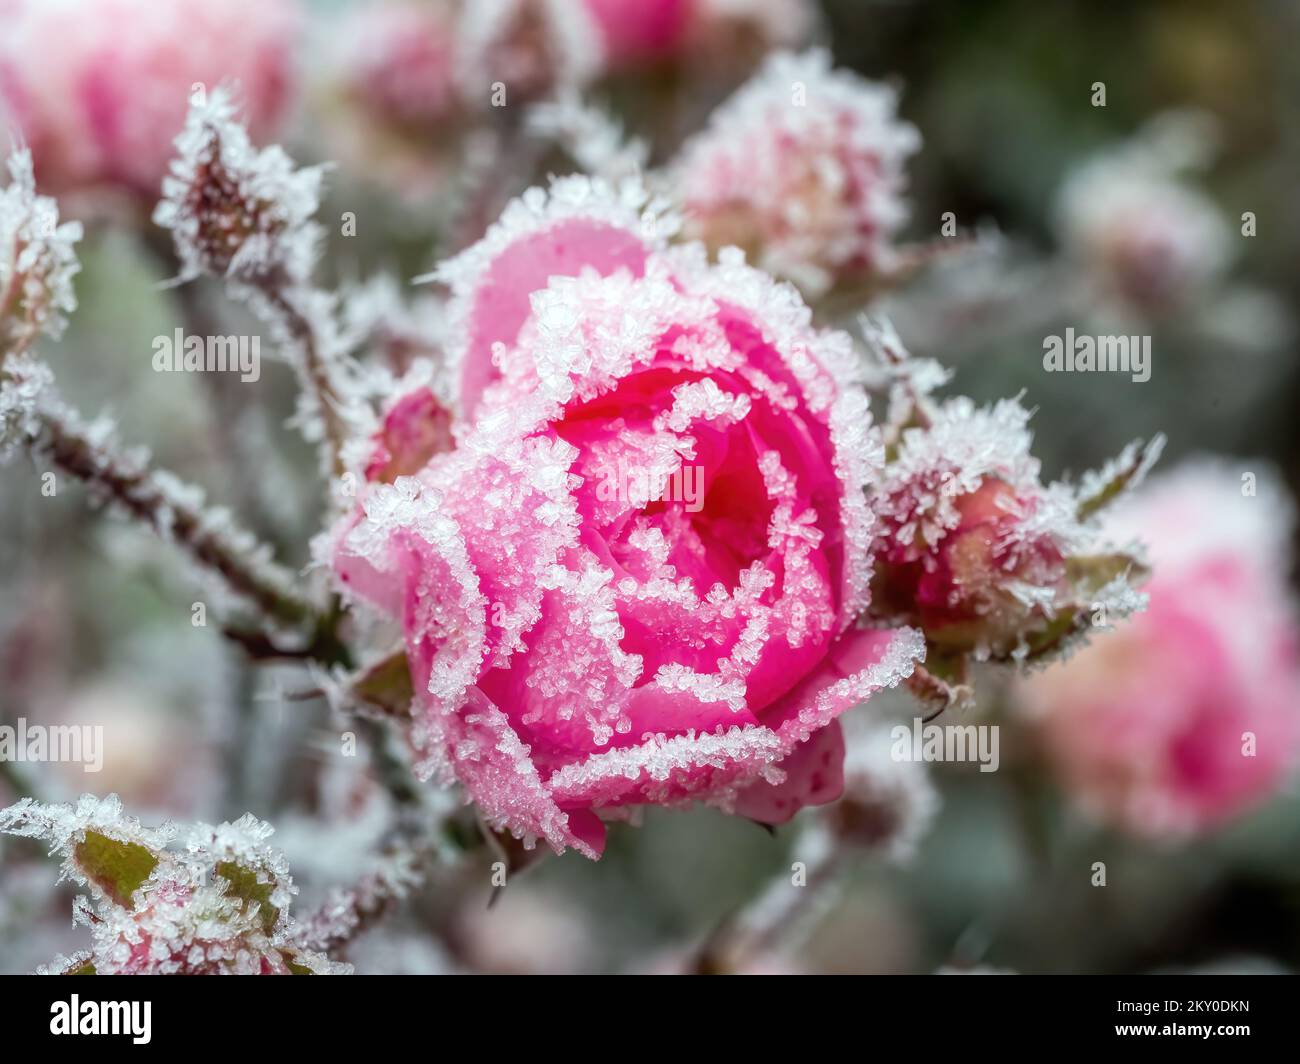 Closeup of frosted red rose bud Stock Photo